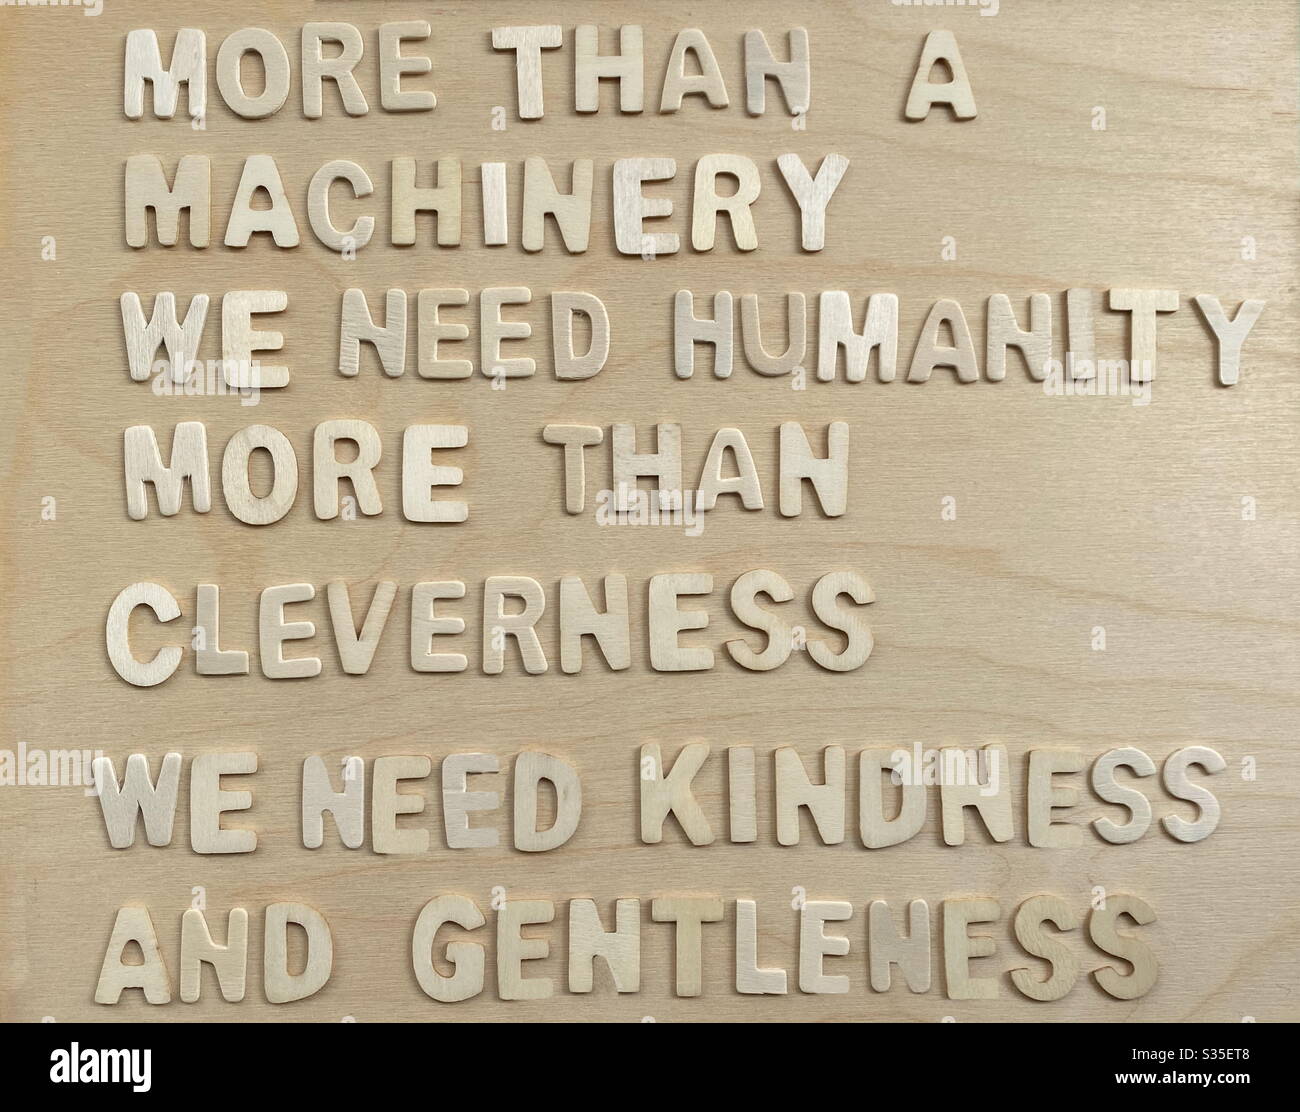 More than machinery, we need humanity, more thancleverness, we need kindness and gentleness Stock Photo